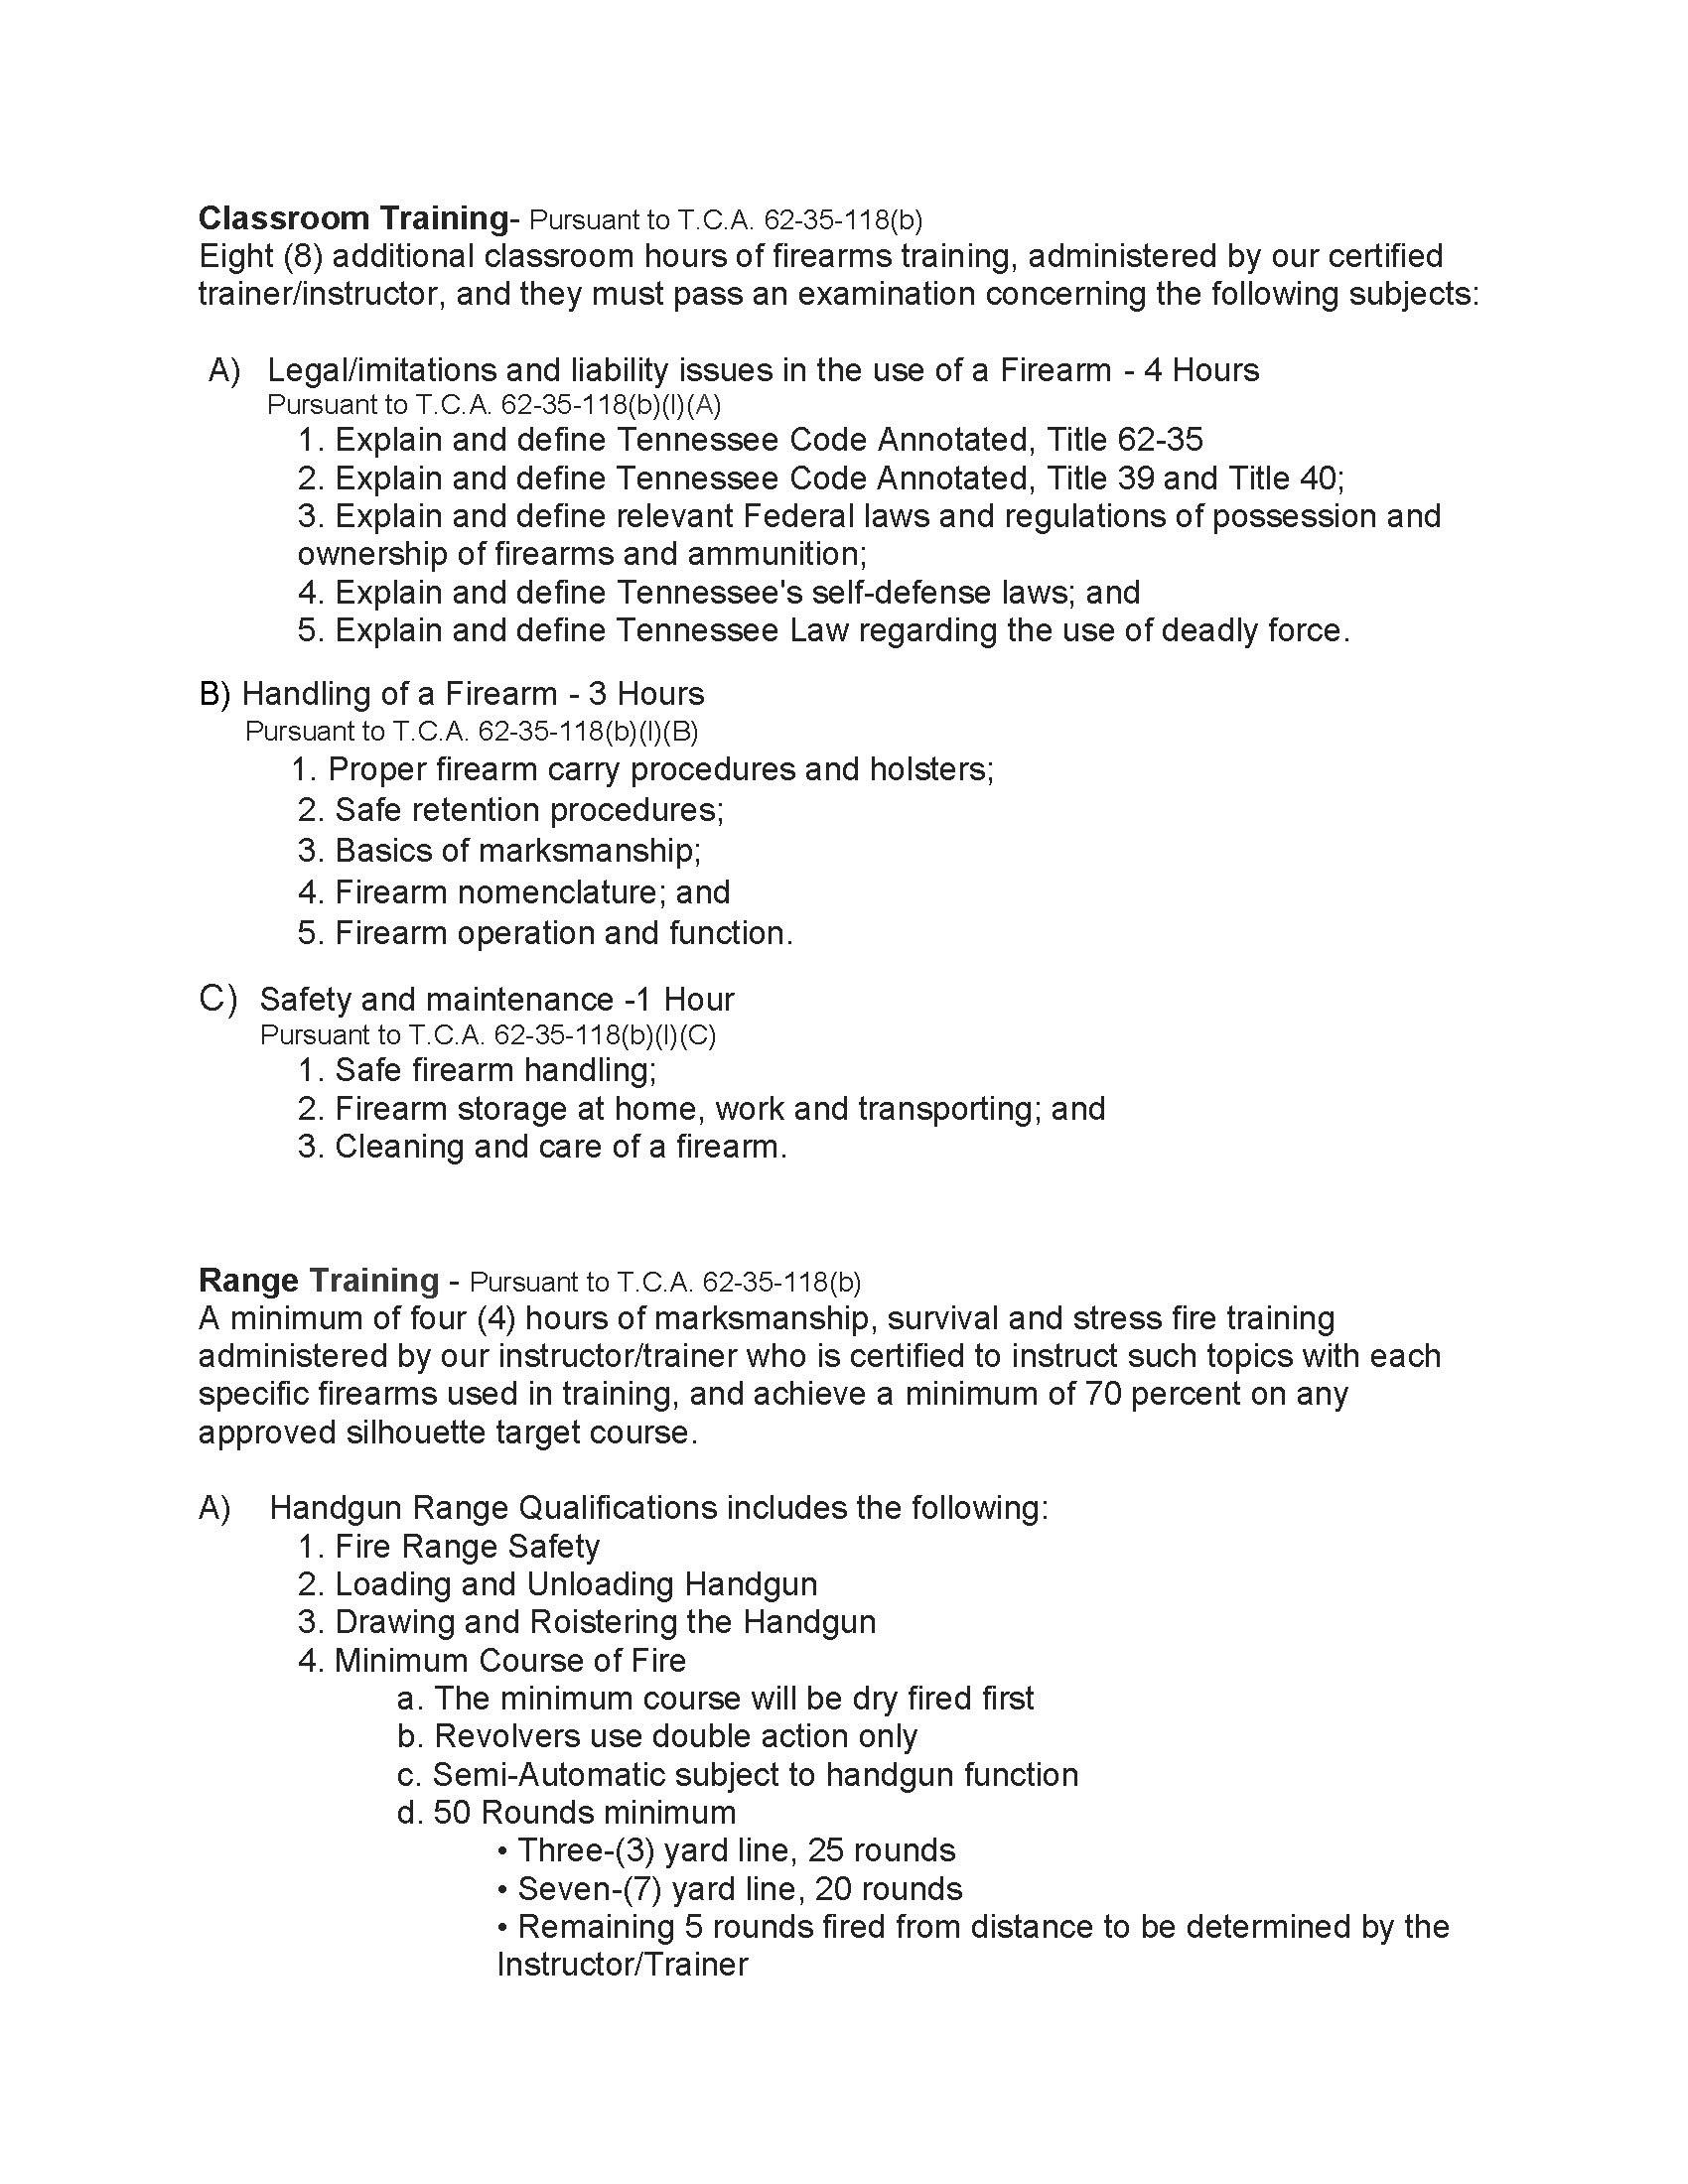 Firearms Training Curriculum Page 1